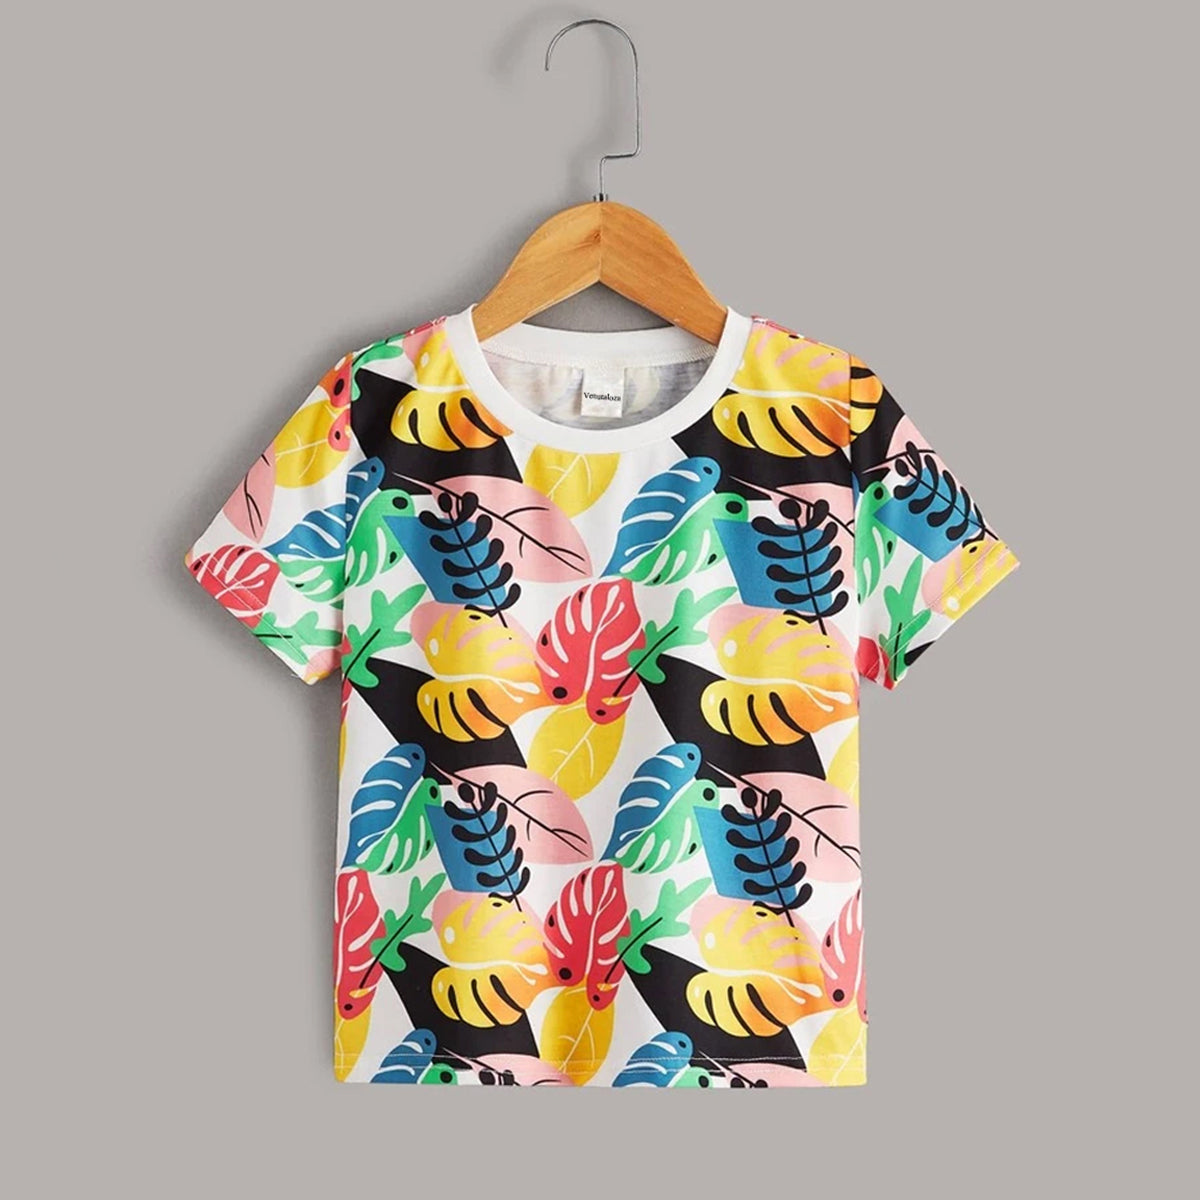 Venutaloza Boy's Allover Graphic & Florals & Colourfull (Combo Pack of 4) T-shirt For Boy's.